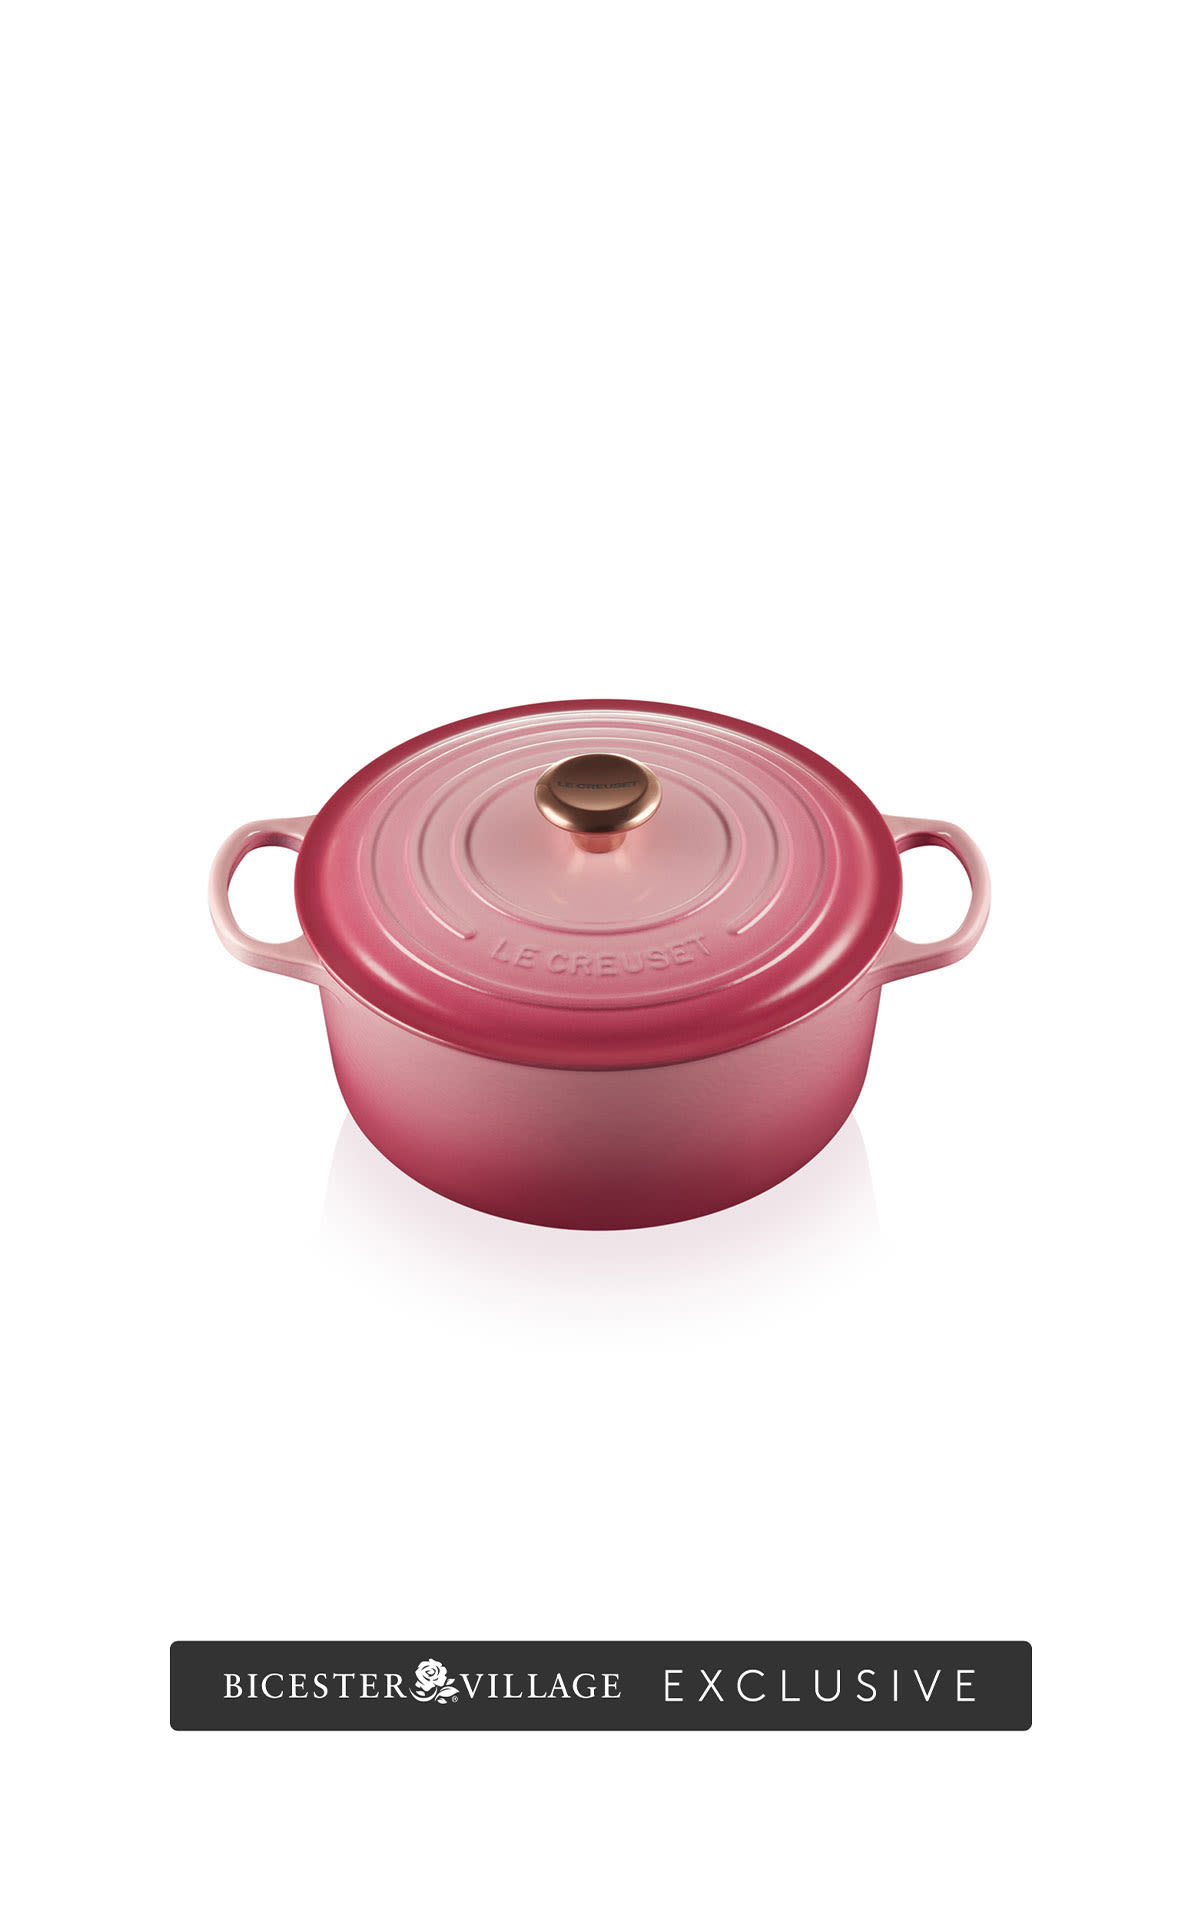 Le Creuset Signature round casserole 24cm berry  from Bicester Village